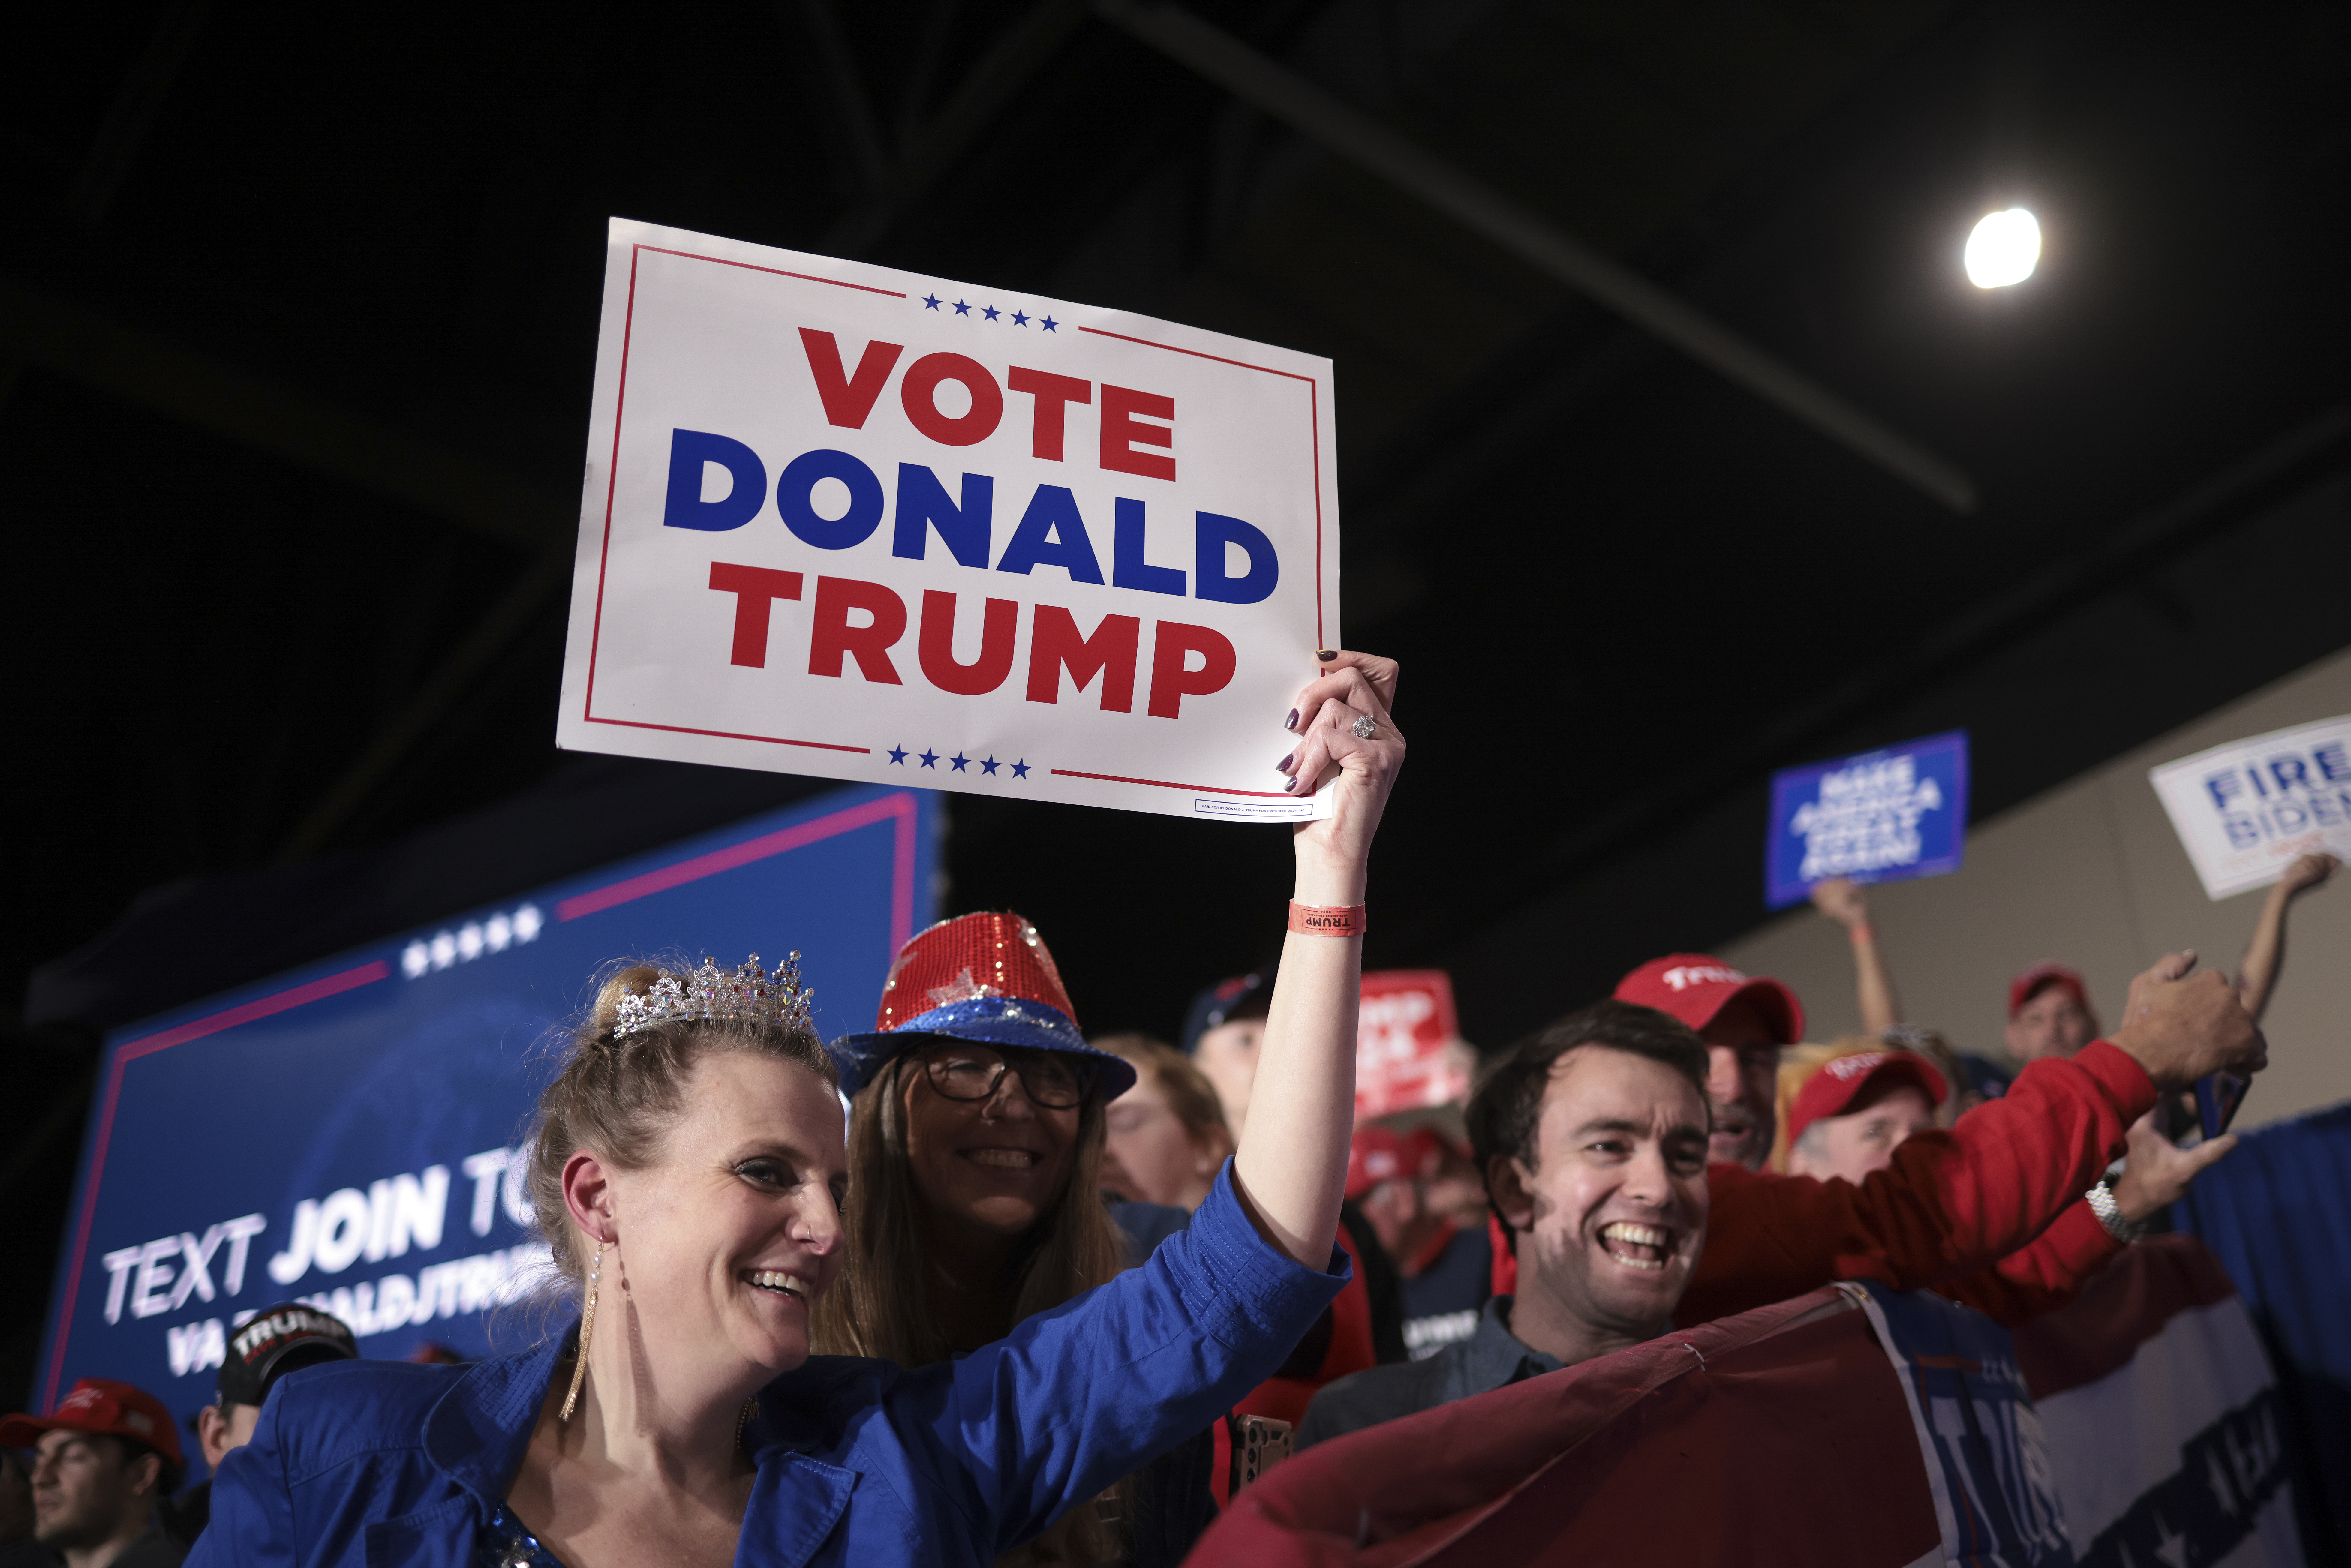  Supporters of Republican presidential candidate and former President Donald Trump cheer as Trump is introduced at a Get Out the Vote Rally March 2, 2024 in Richmond, Virginia. Sixteen states, including Virginia, will vote during Super Tuesday on March 5. (Photo by Win McNamee/Getty Images)